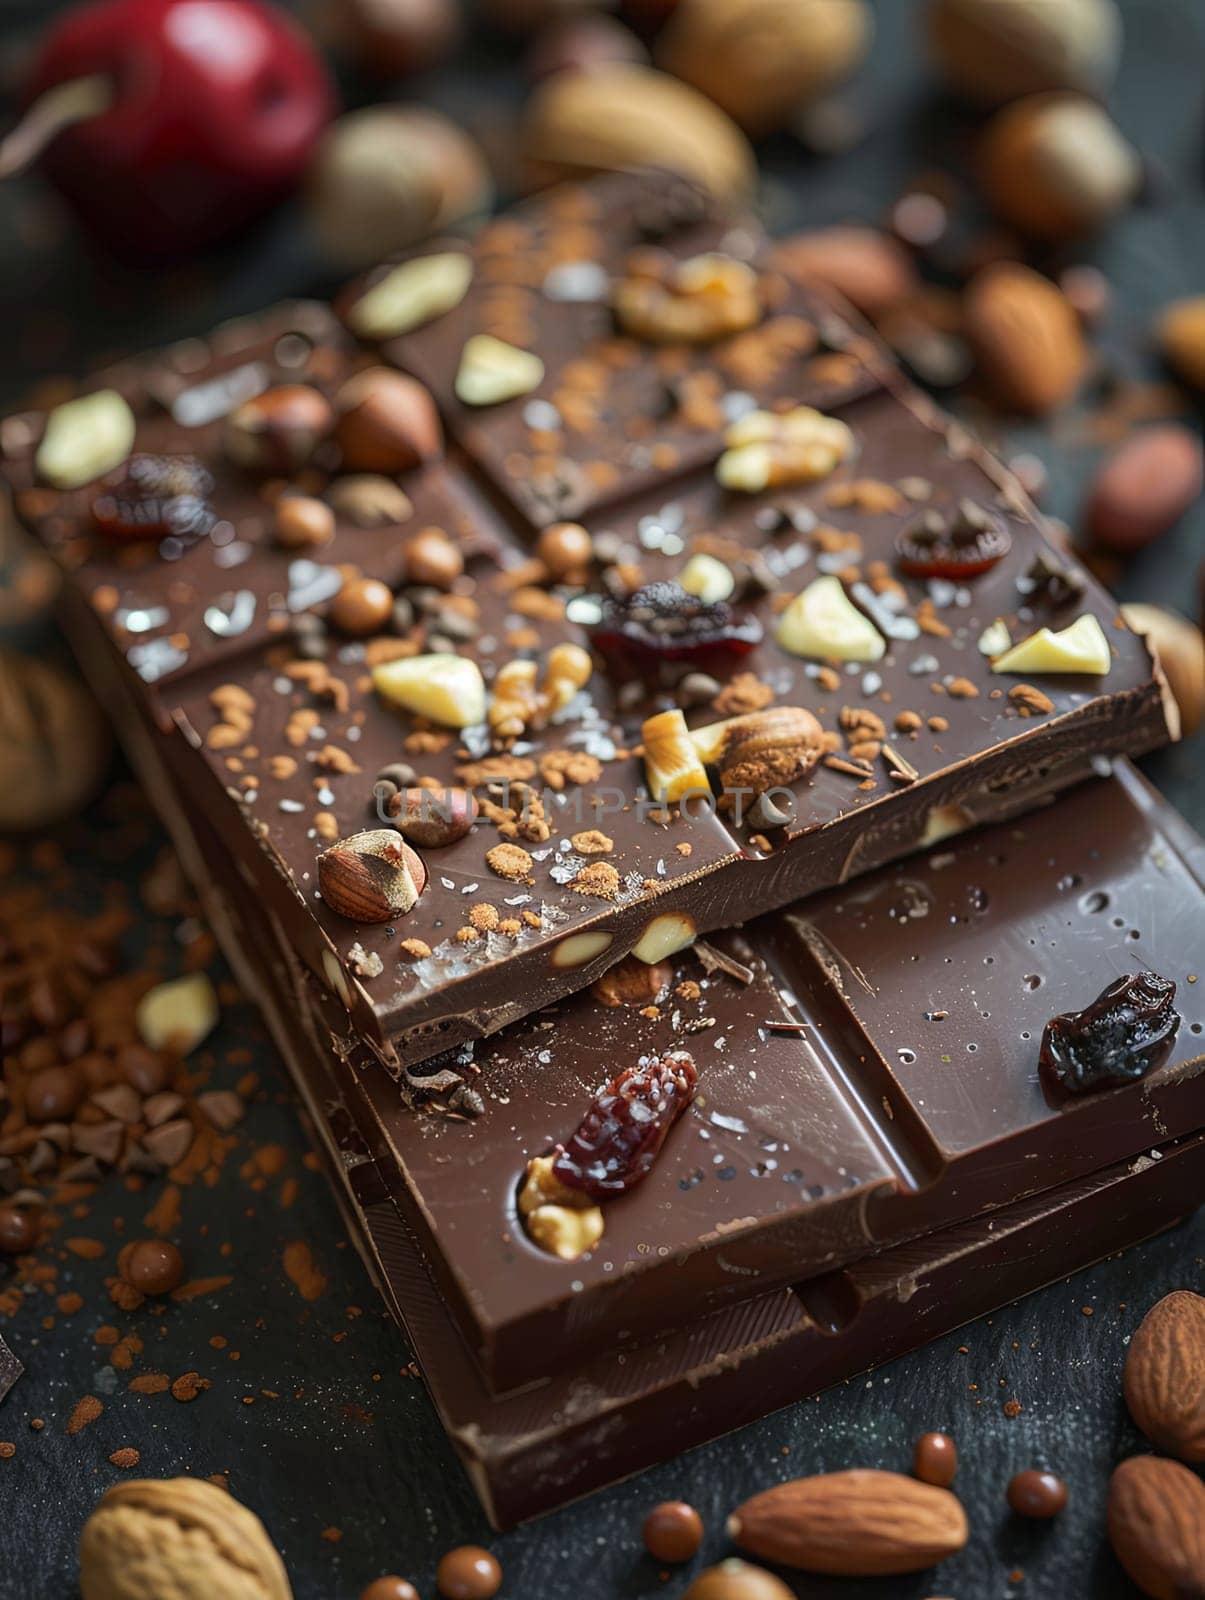 Detailed close-up of a chocolate bar with nuts, showcasing rich textures and natural ingredients, appealing and appetizing.